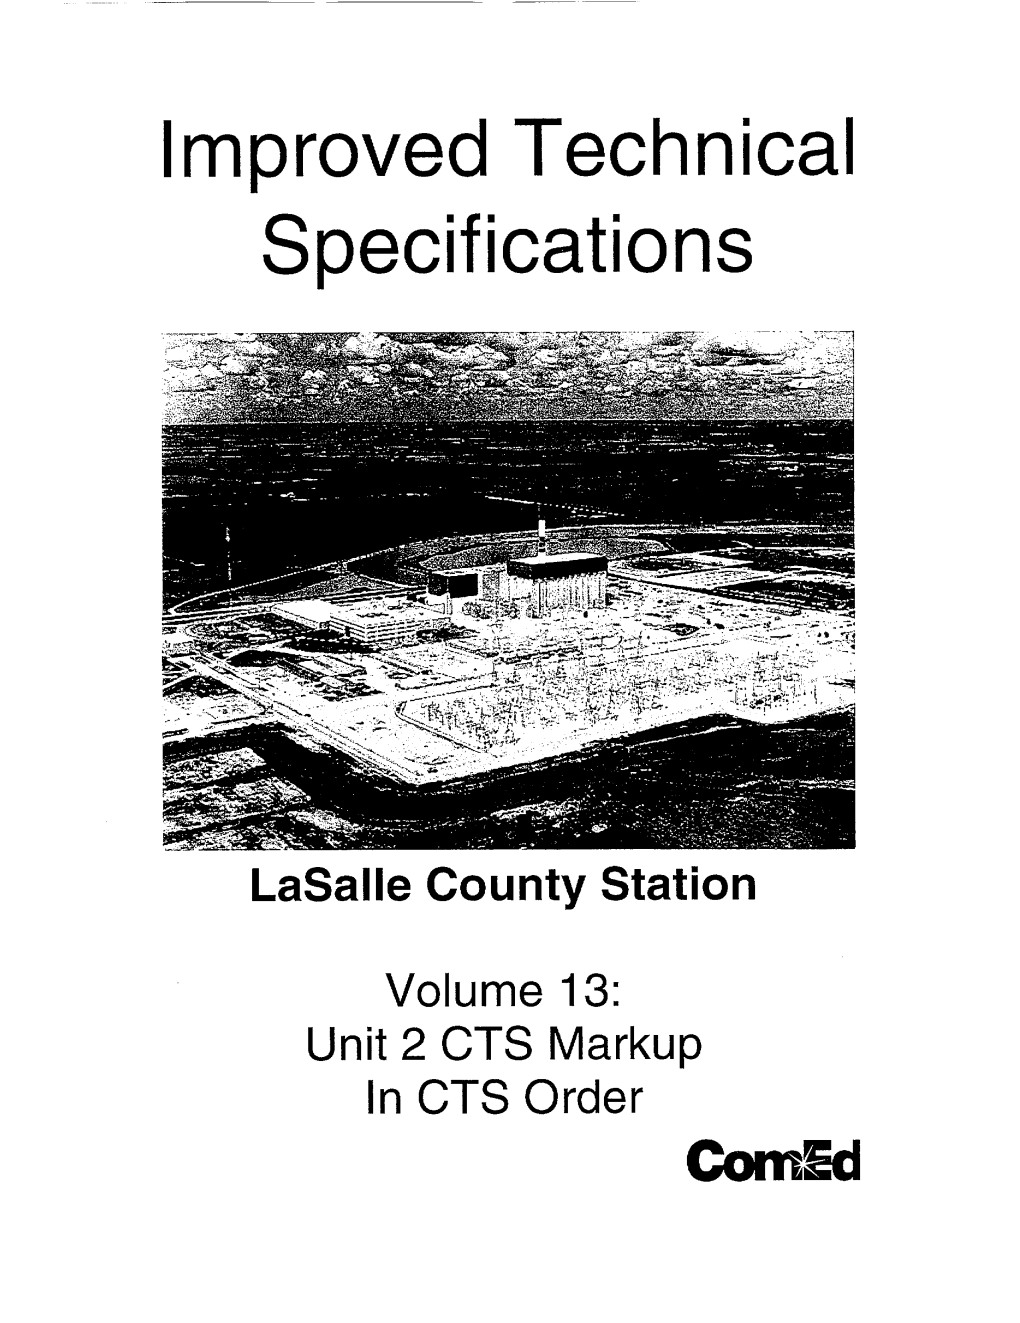 Improved Technical Specifications, Lasalle County Station, Volume 13